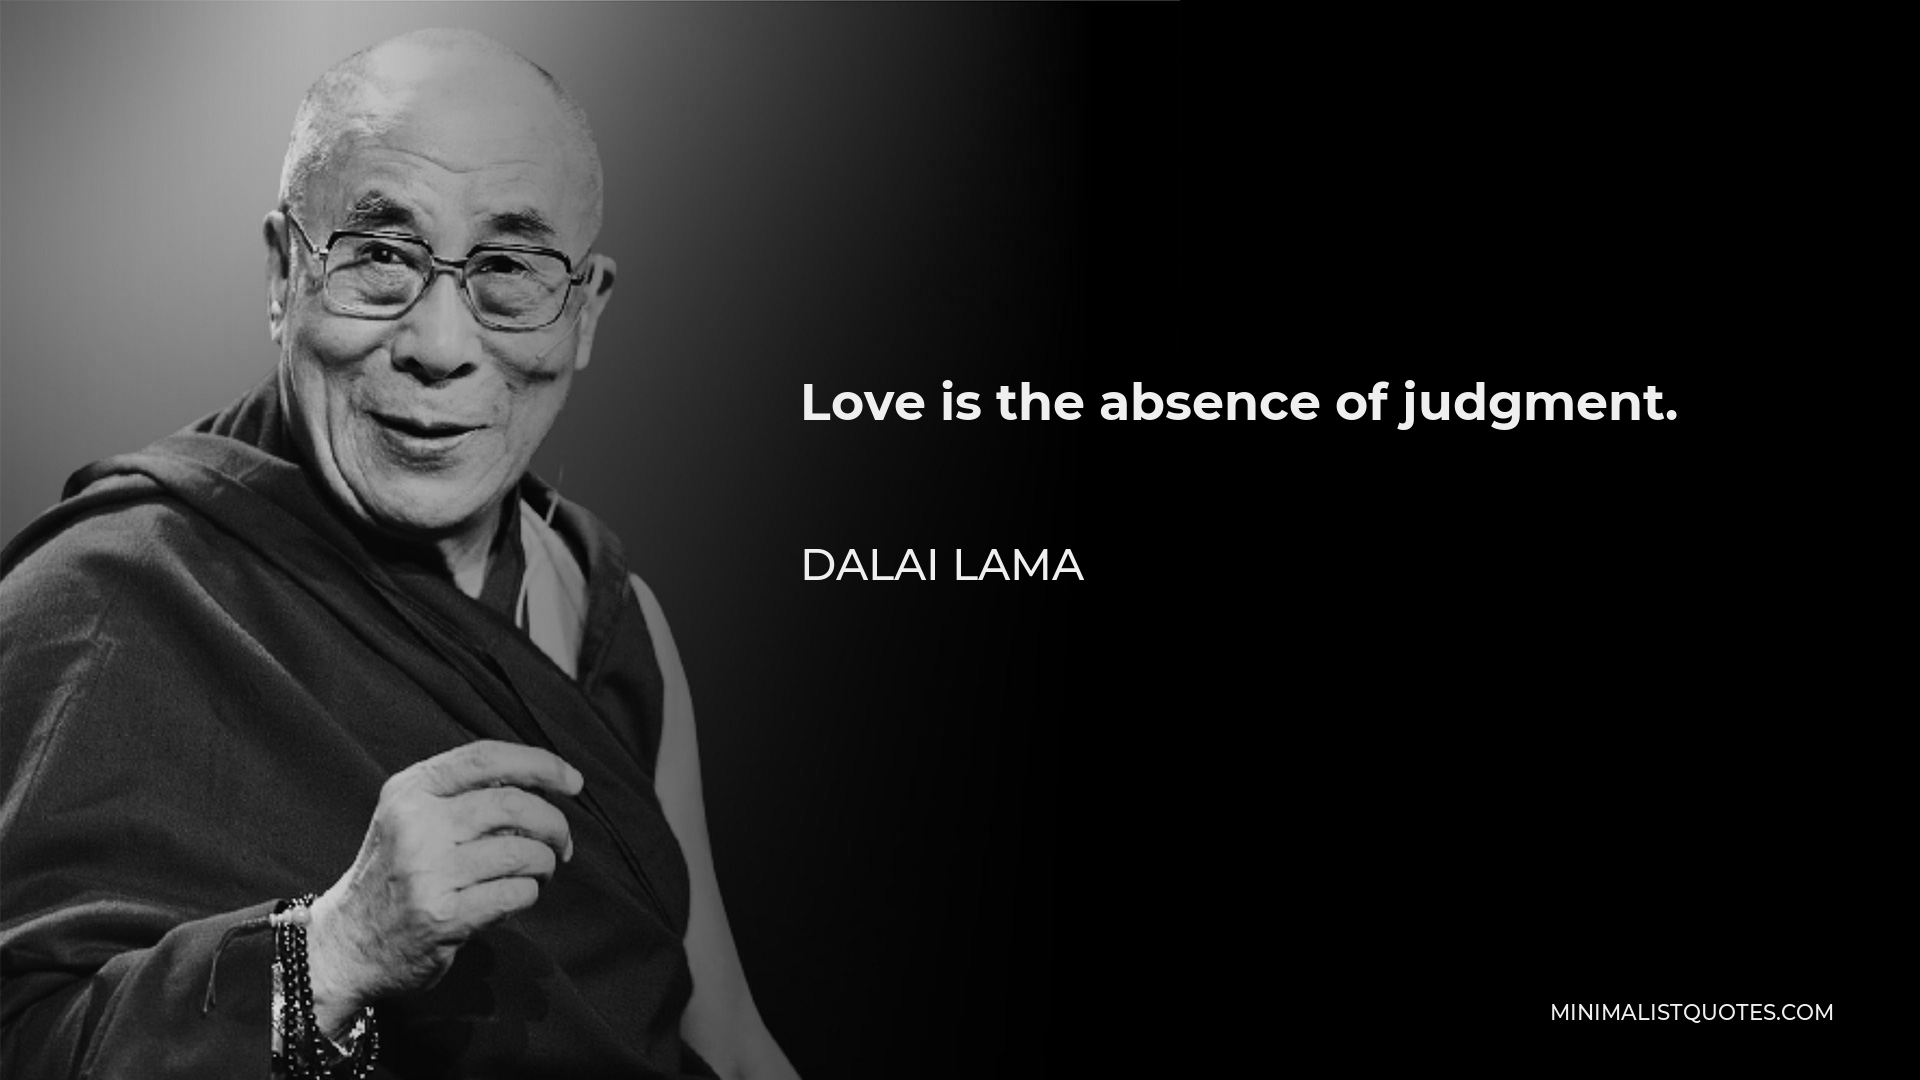 Dalai Lama Quote - Love is the absence of judgment.